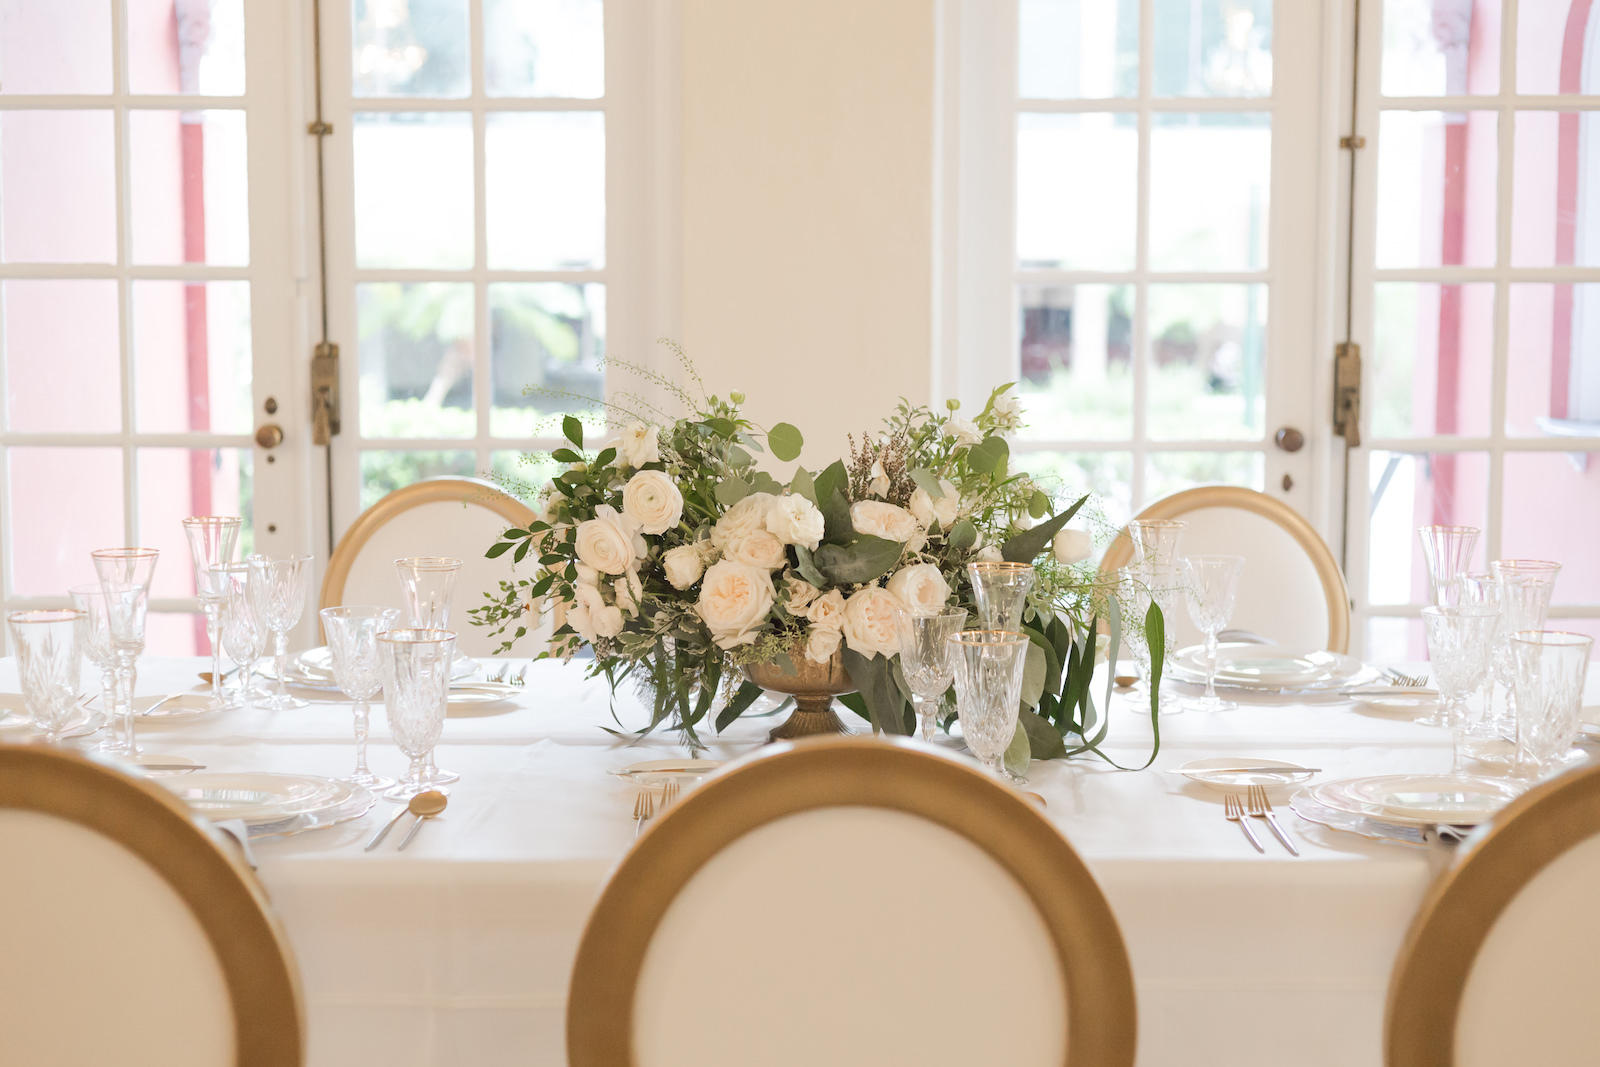 Southern Charm classic and timeless lush ivory roses, eucalyptis and greenery low floral centerpiece | Tampa Bay wedding planner and design Elegant Affairs by Design | Kate Ryan Event Rentals